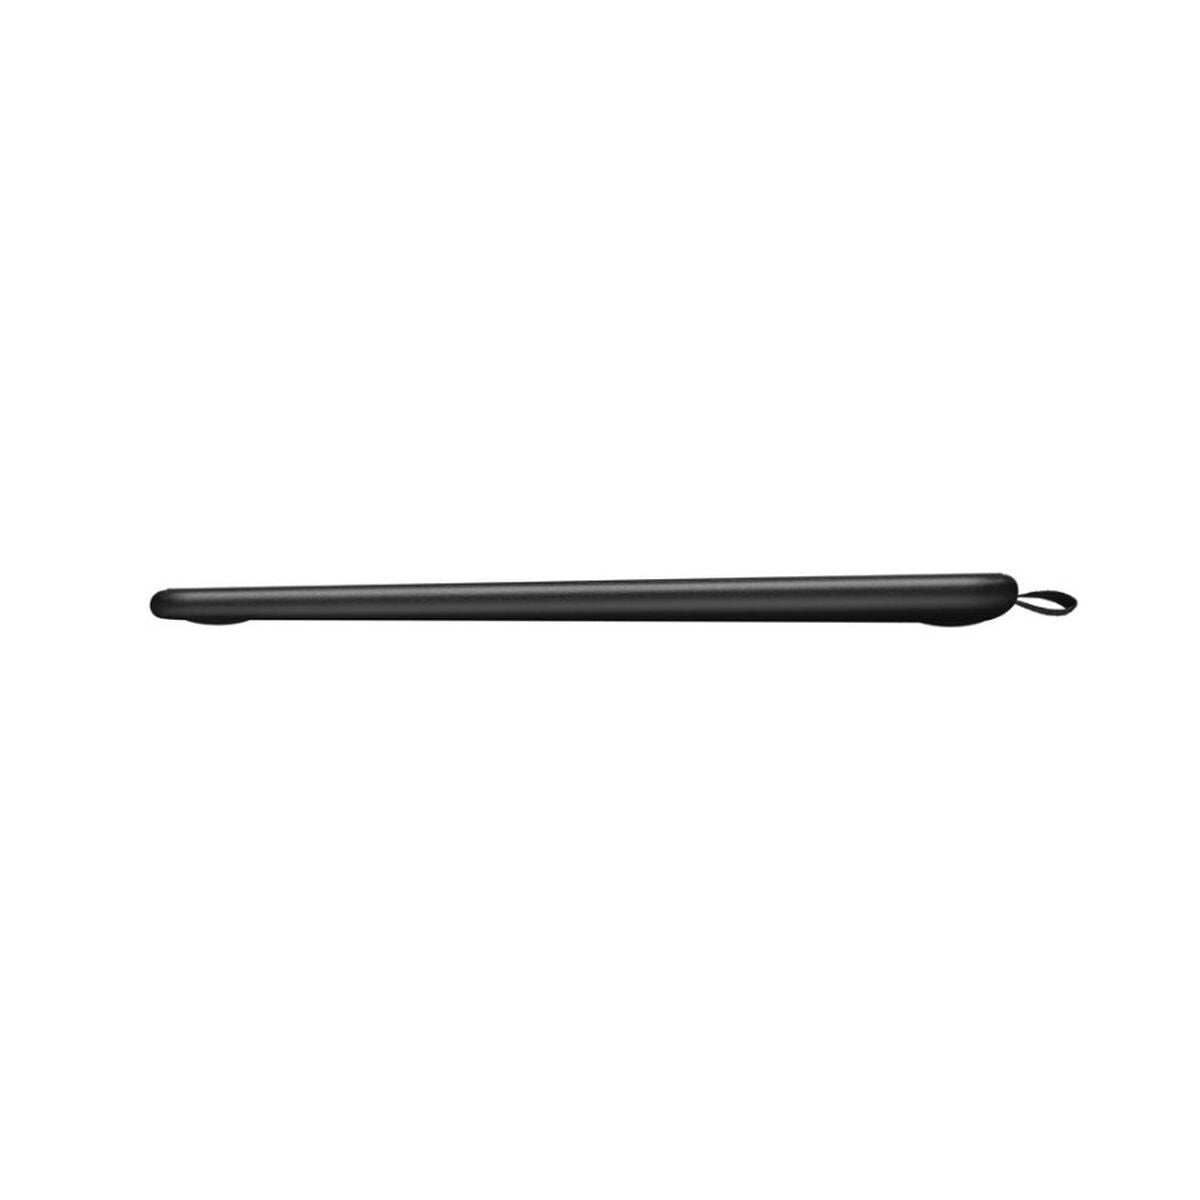 Graphics tablets and pens Wacom CTL-4100WLK-S, Wacom, Computing, Accessories, graphics-tablets-and-pens-wacom-ctl-4100wlk-s, Brand_Wacom, category-reference-2609, category-reference-2803, category-reference-2812, category-reference-t-19685, category-reference-t-19908, category-reference-t-21353, computers / components, Condition_NEW, Price_100 - 200, Teleworking, RiotNook